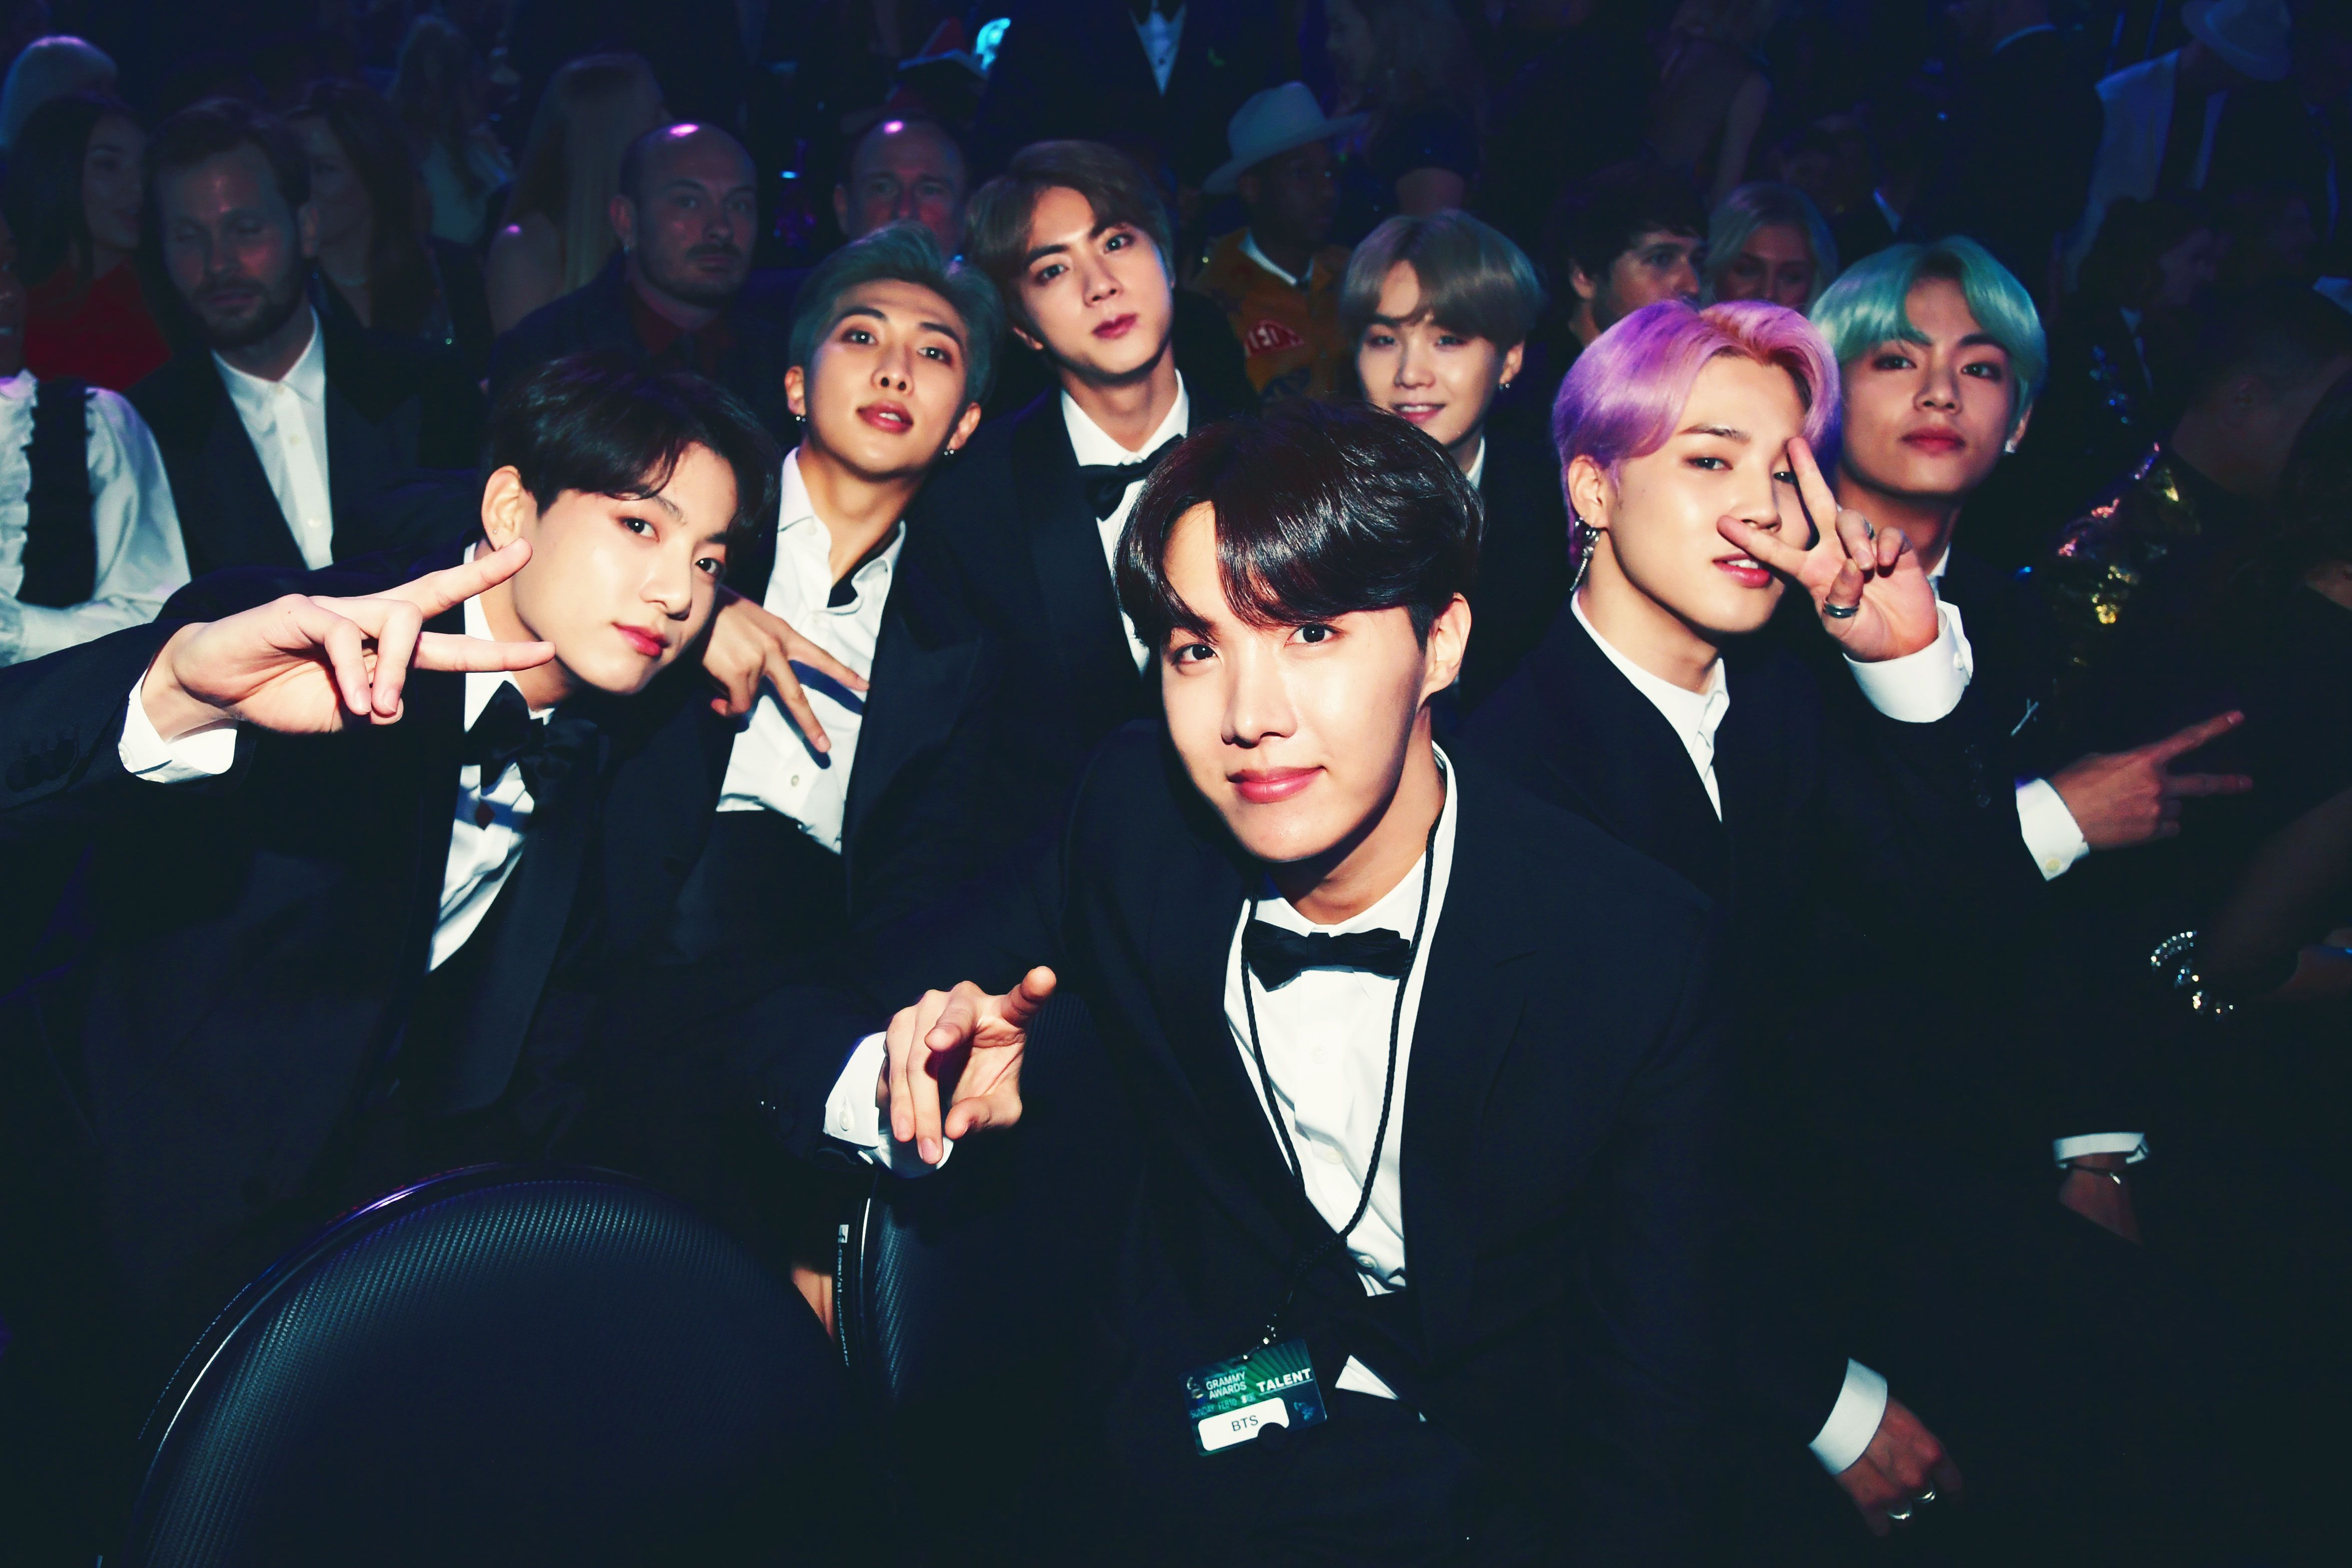 BTS to appear at the 2019 Grammys